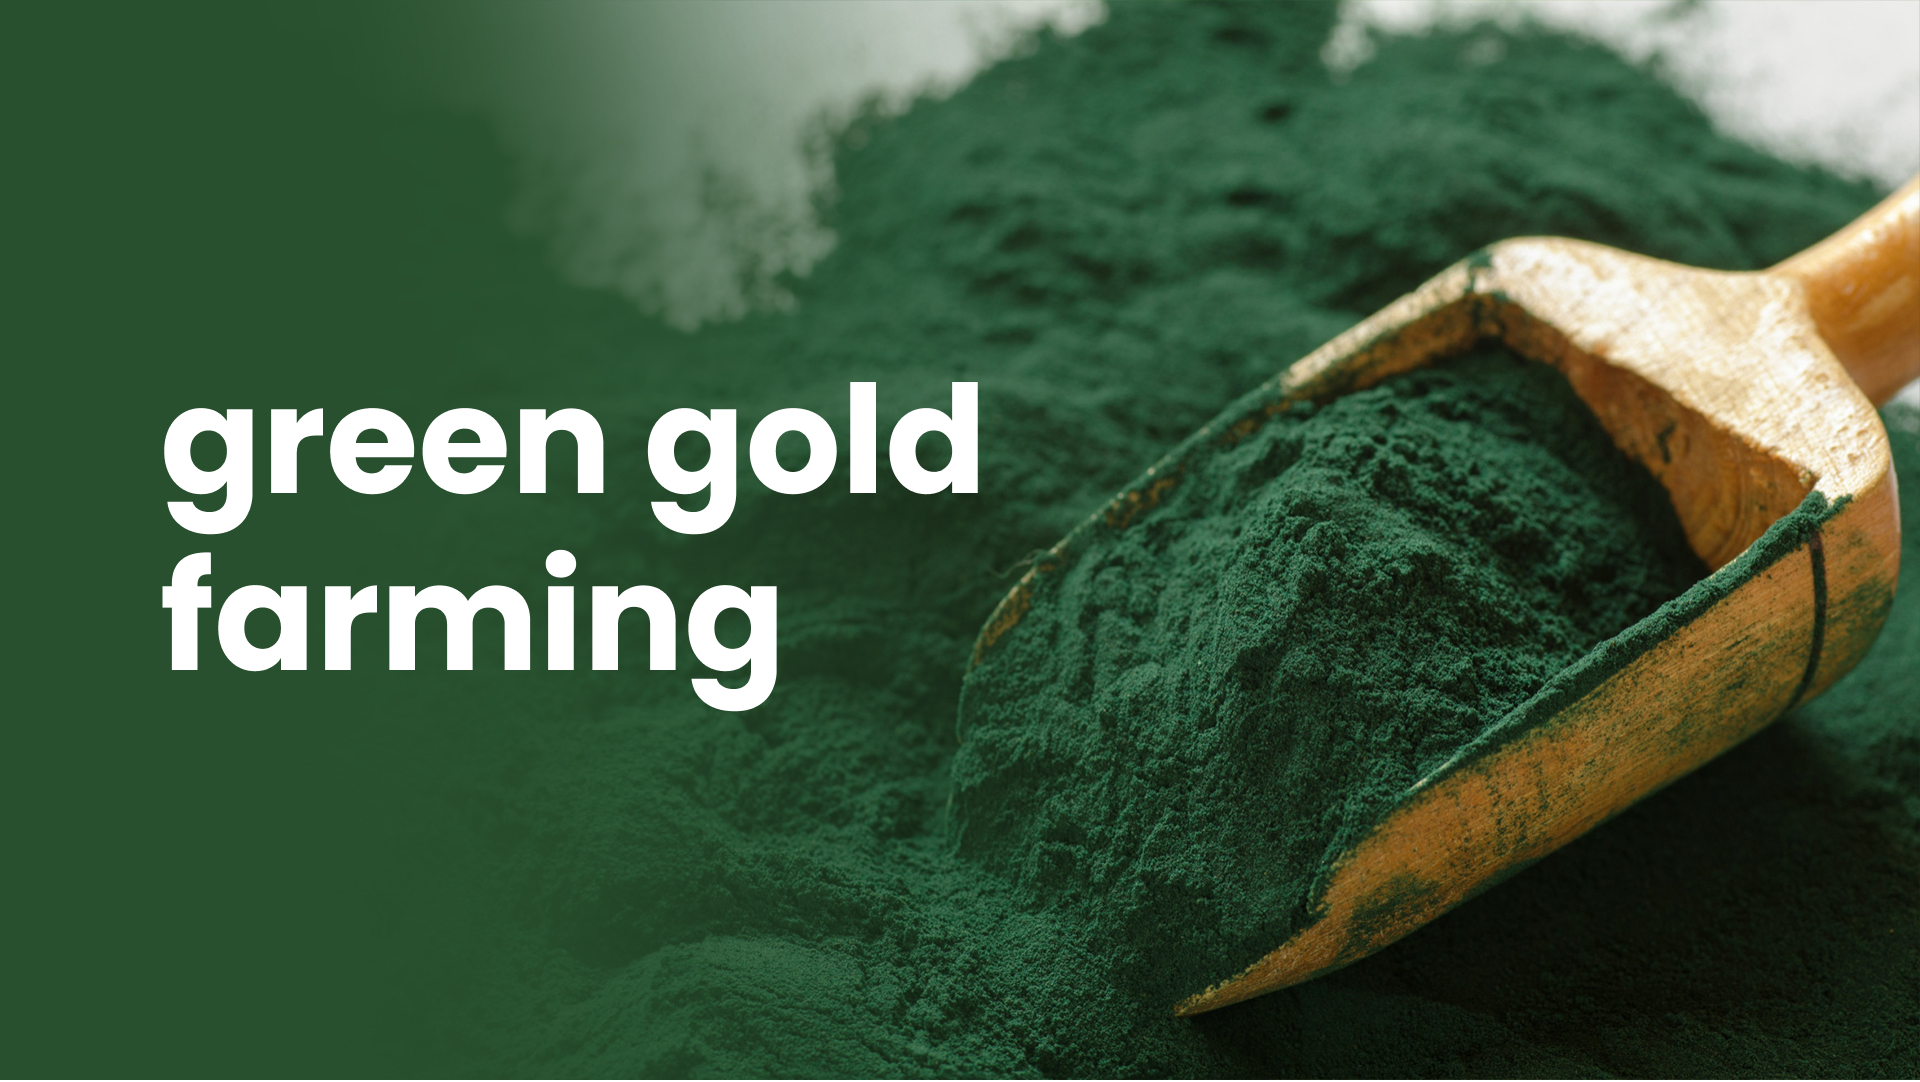 Course Trailer: Guide to Advanced Spirulina Farming: Earn 1 crore / acre. Watch to know more.